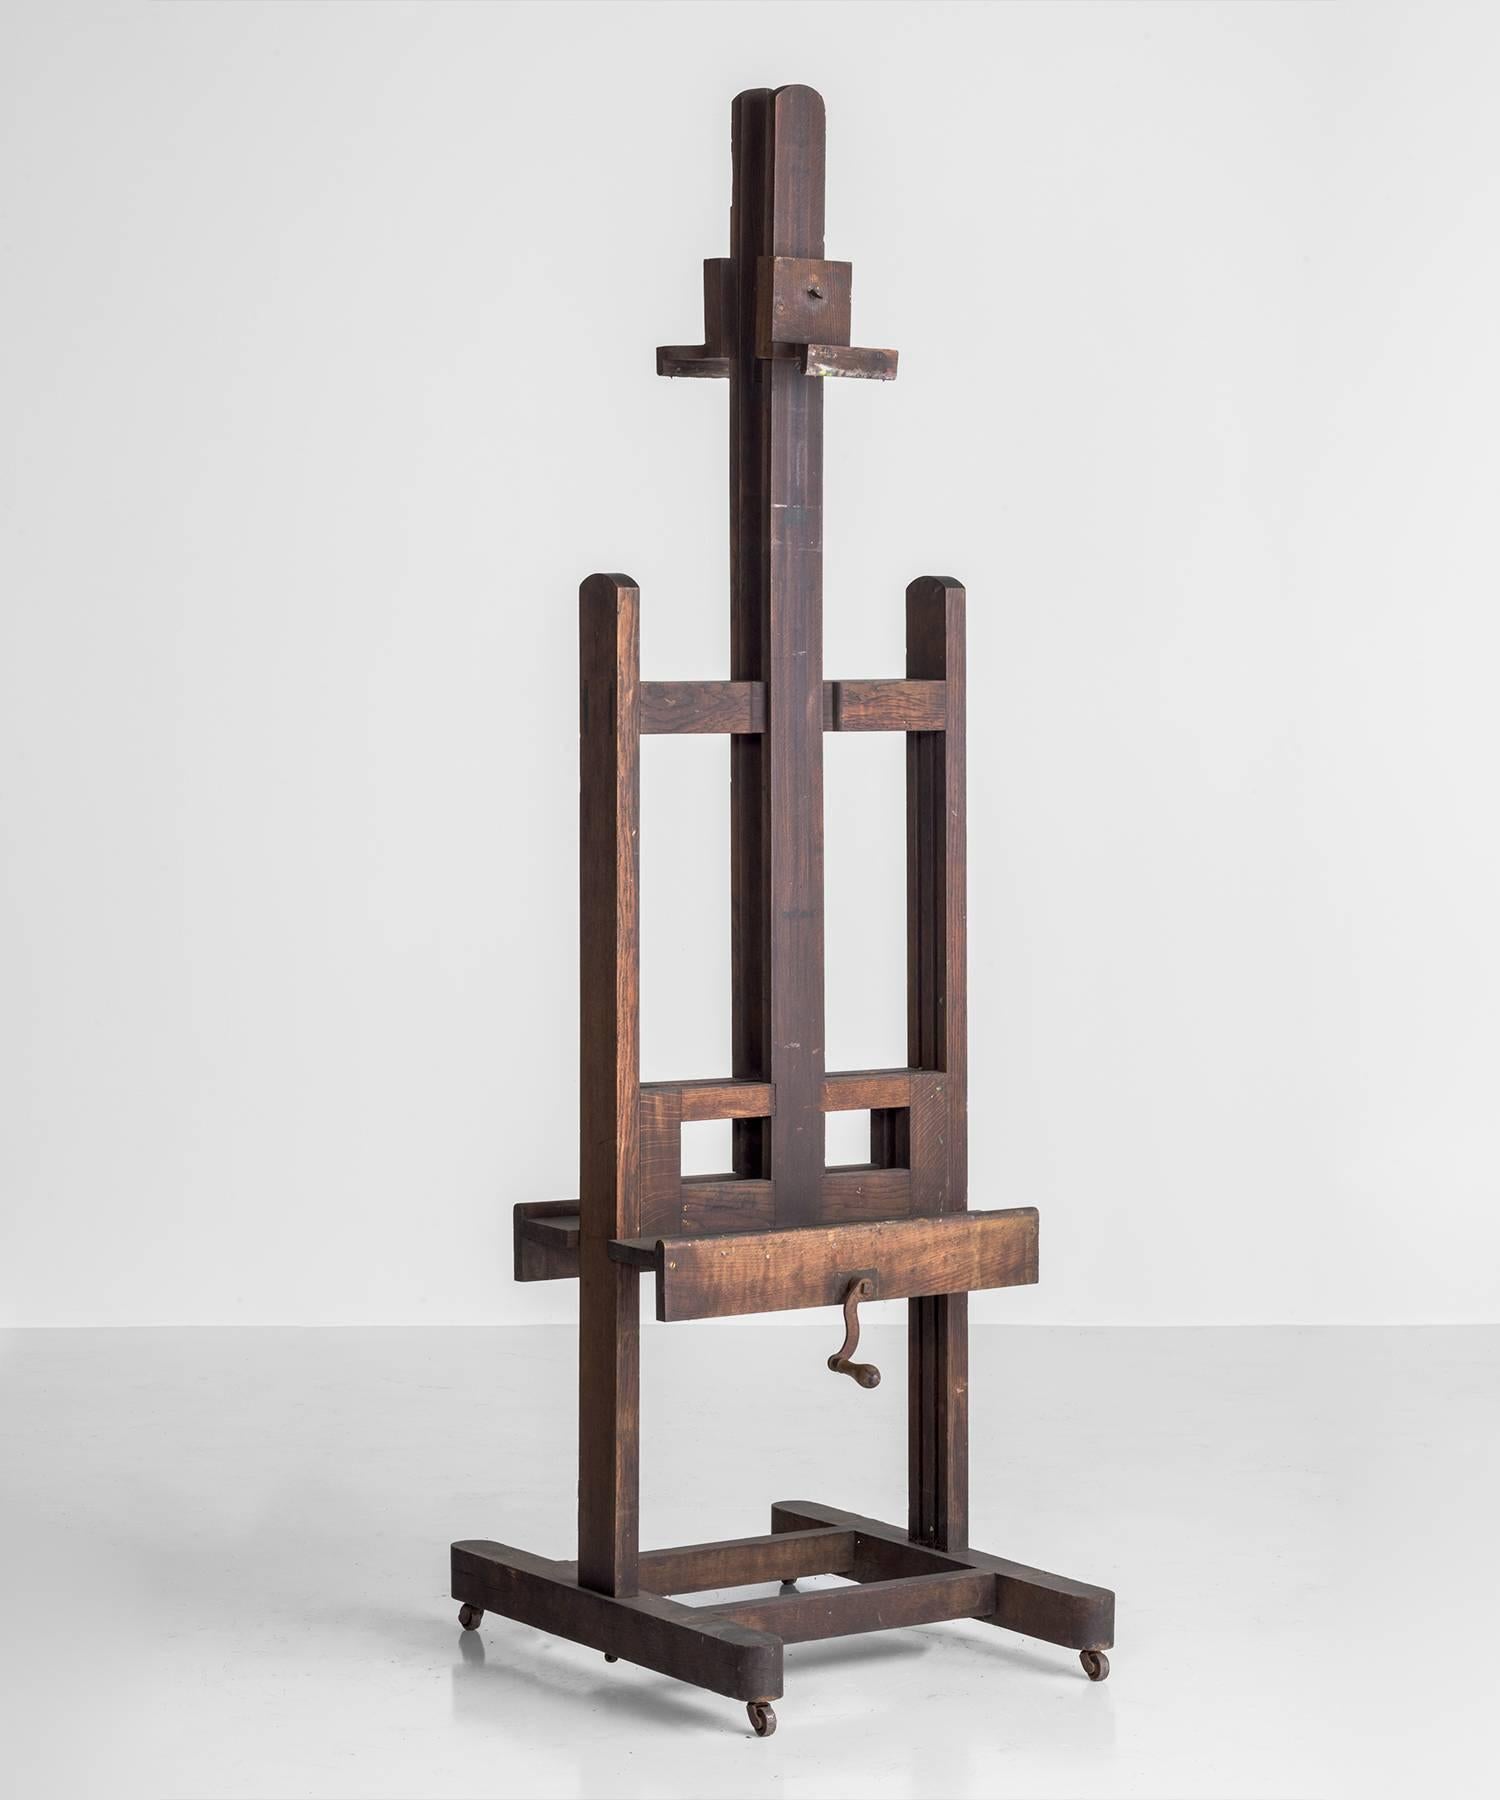 Double-sided Edwardian oak easel, made in England, circa 1910.

Solid oak construction, with original castors and iron hardware. The easel can support art on each face.

Measures: 23